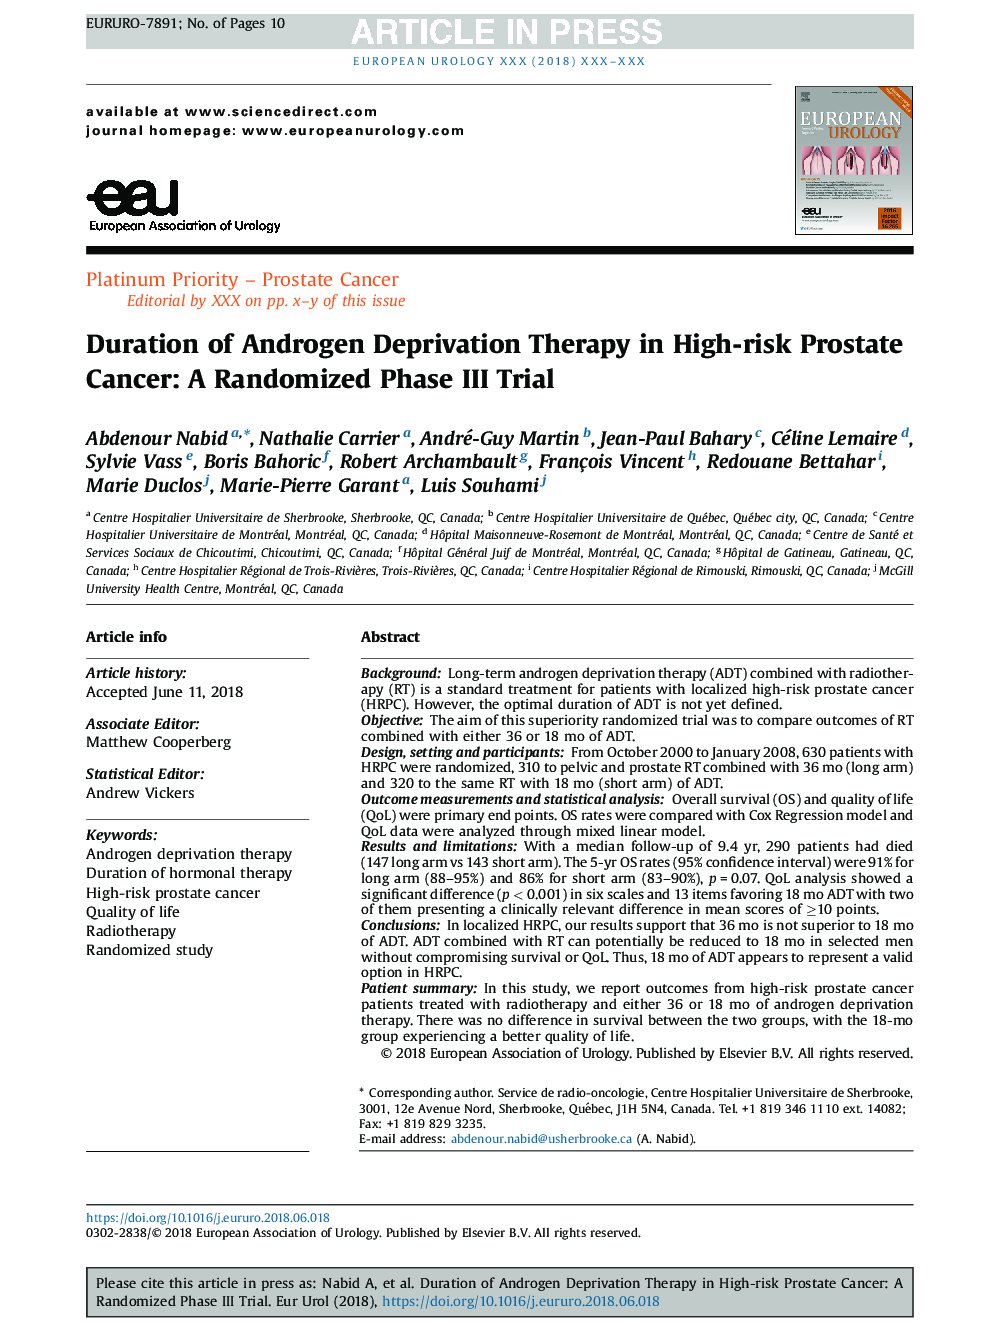 Duration of Androgen Deprivation Therapy in High-risk Prostate Cancer: A Randomized Phase III Trial